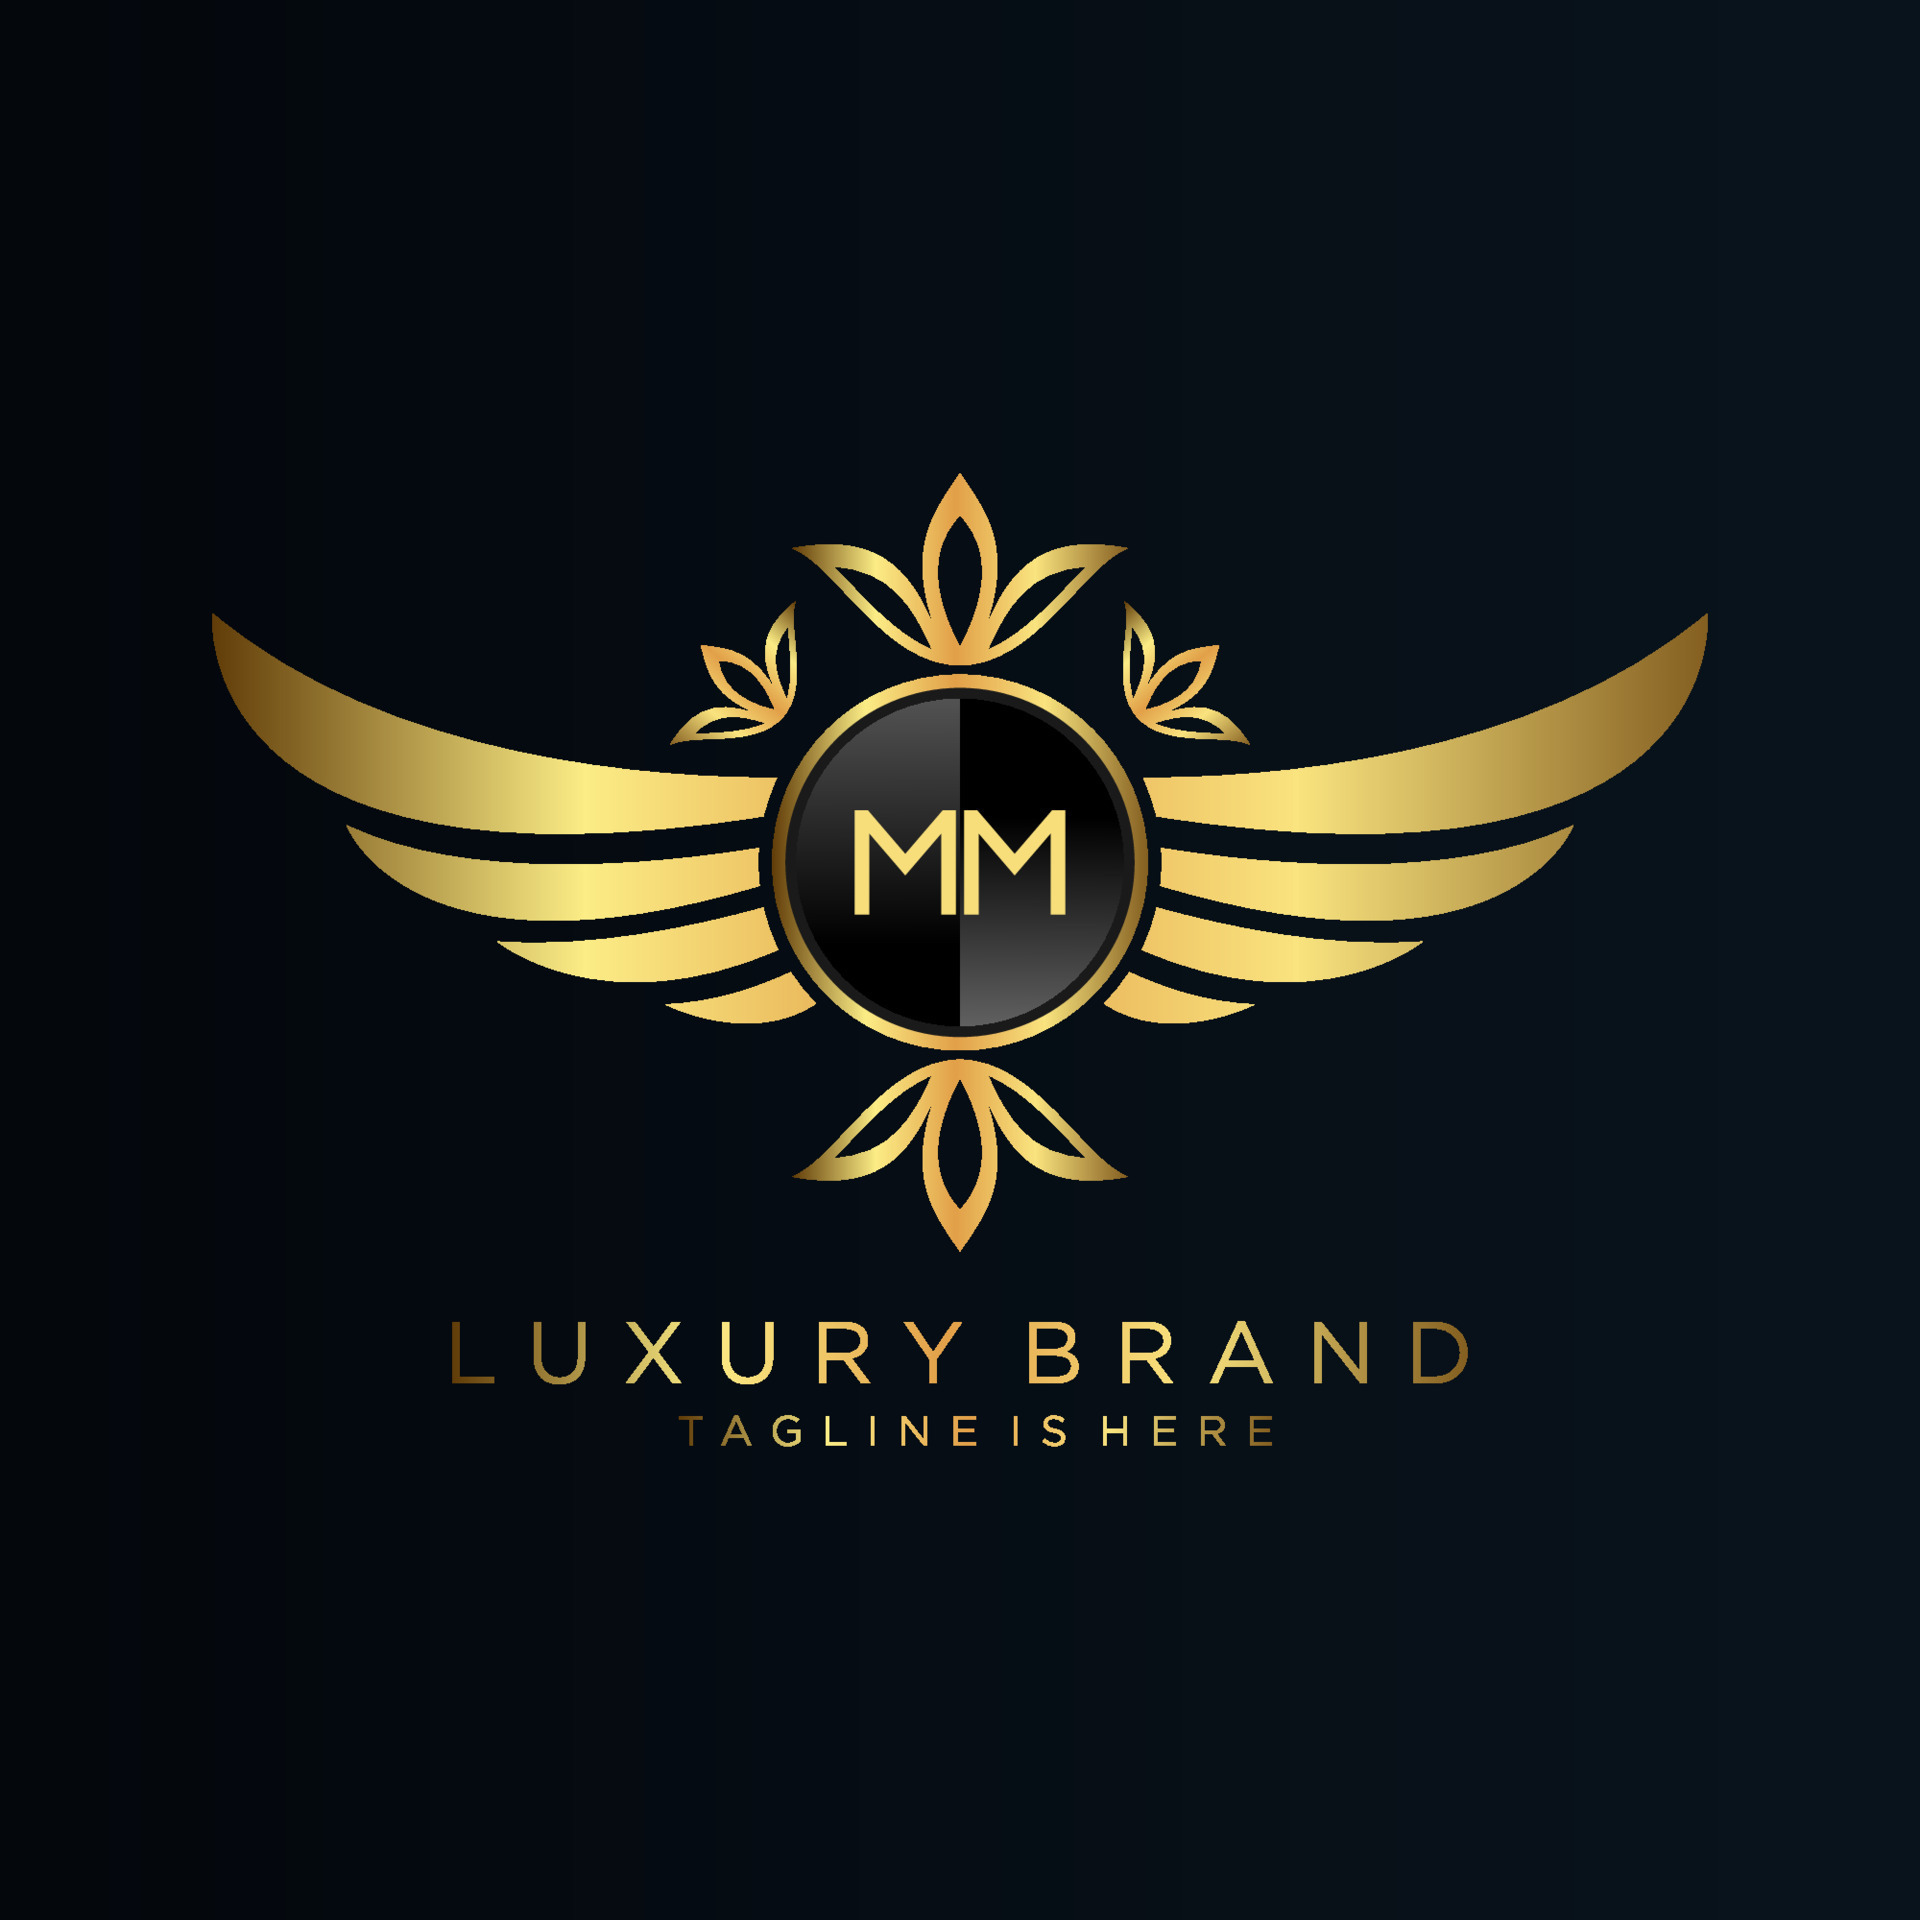 MM Letter Initial with Royal Template.elegant with Crown Logo Vector,  Creative Lettering Logo Vector Illustration Stock Vector - Illustration of  modern, corporate: 197842489